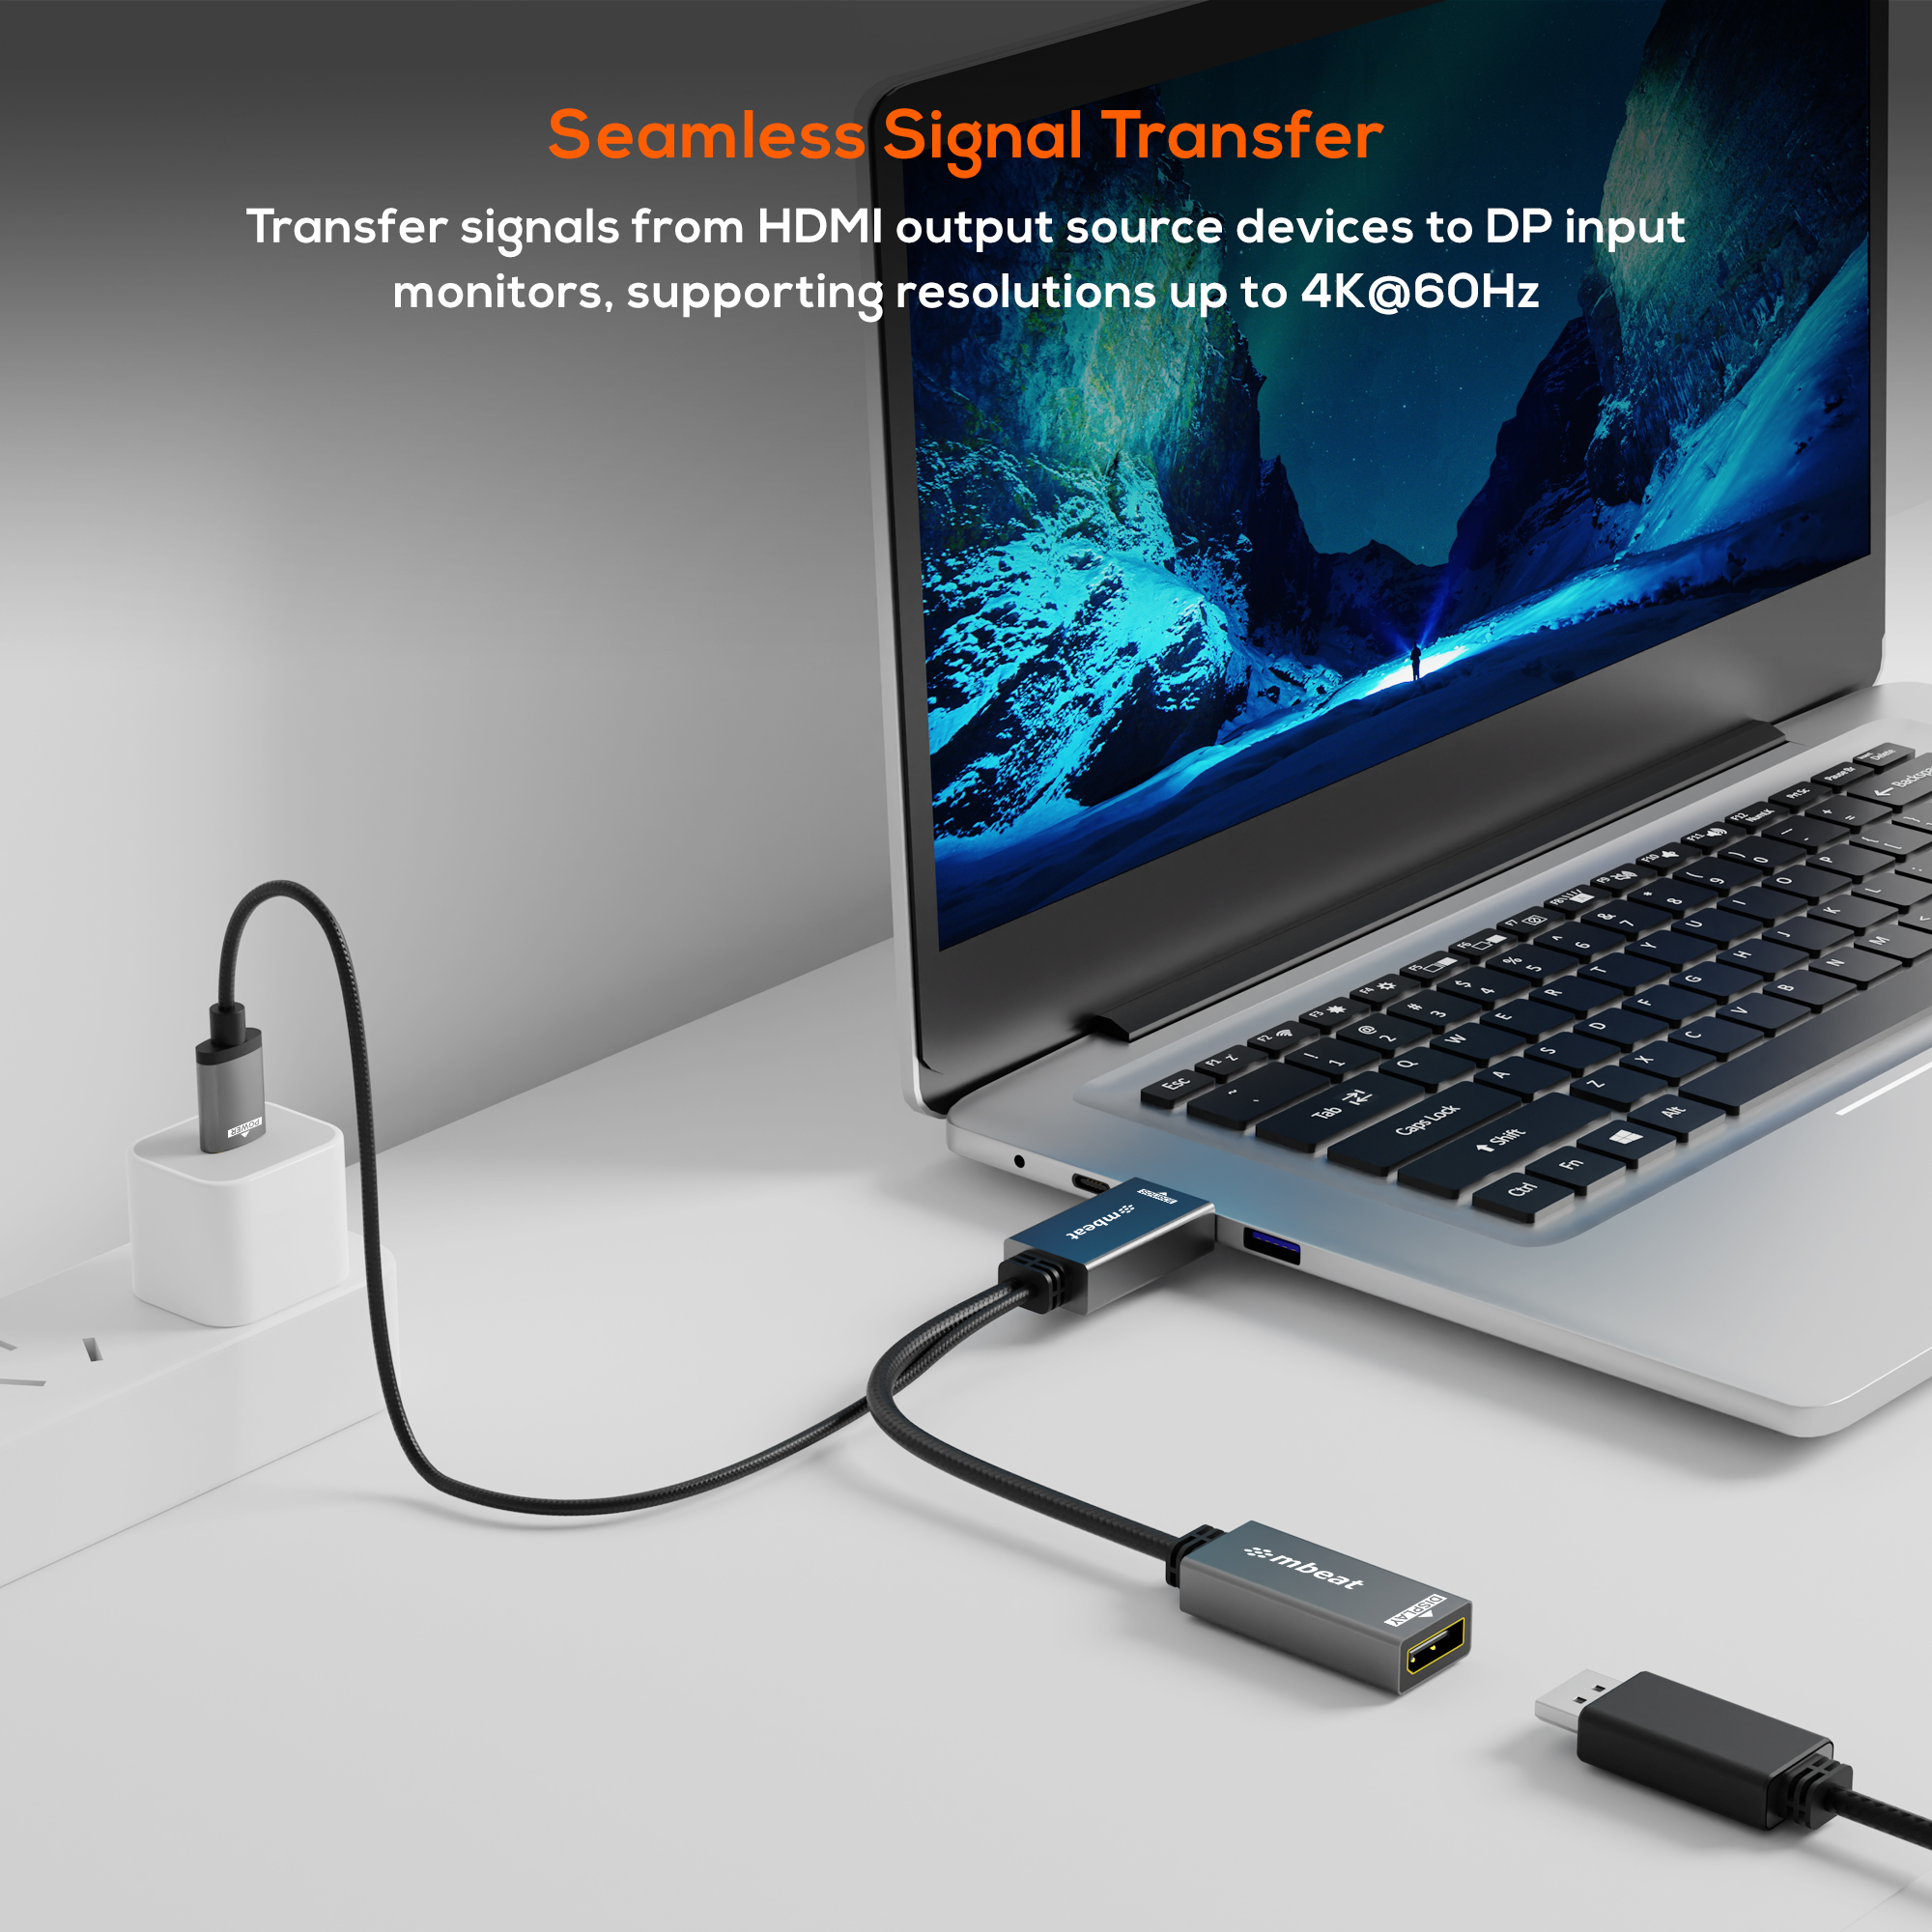 A large marketing image providing additional information about the product mbeat Tough Link HDMI to DisplayPort Adapter with USB Power - Additional alt info not provided